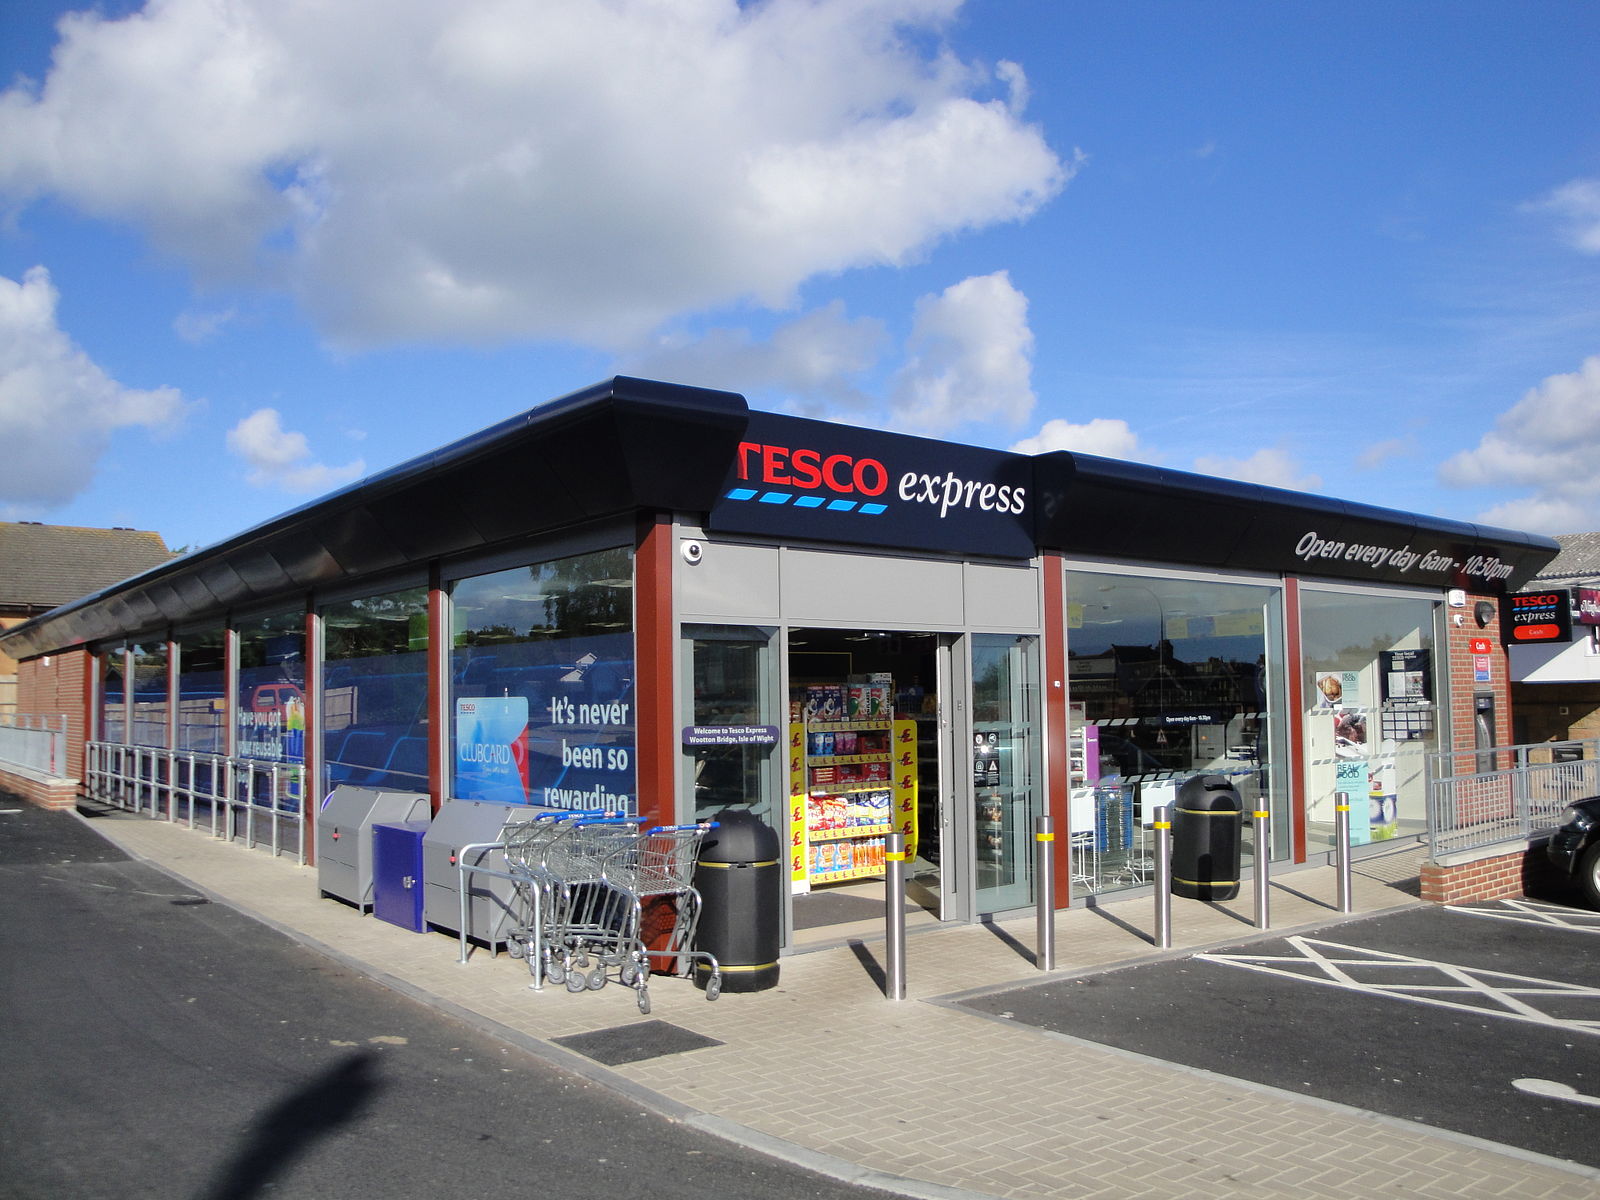 Tesco Axes Contract Cleaners in Almost 2,000 Stores